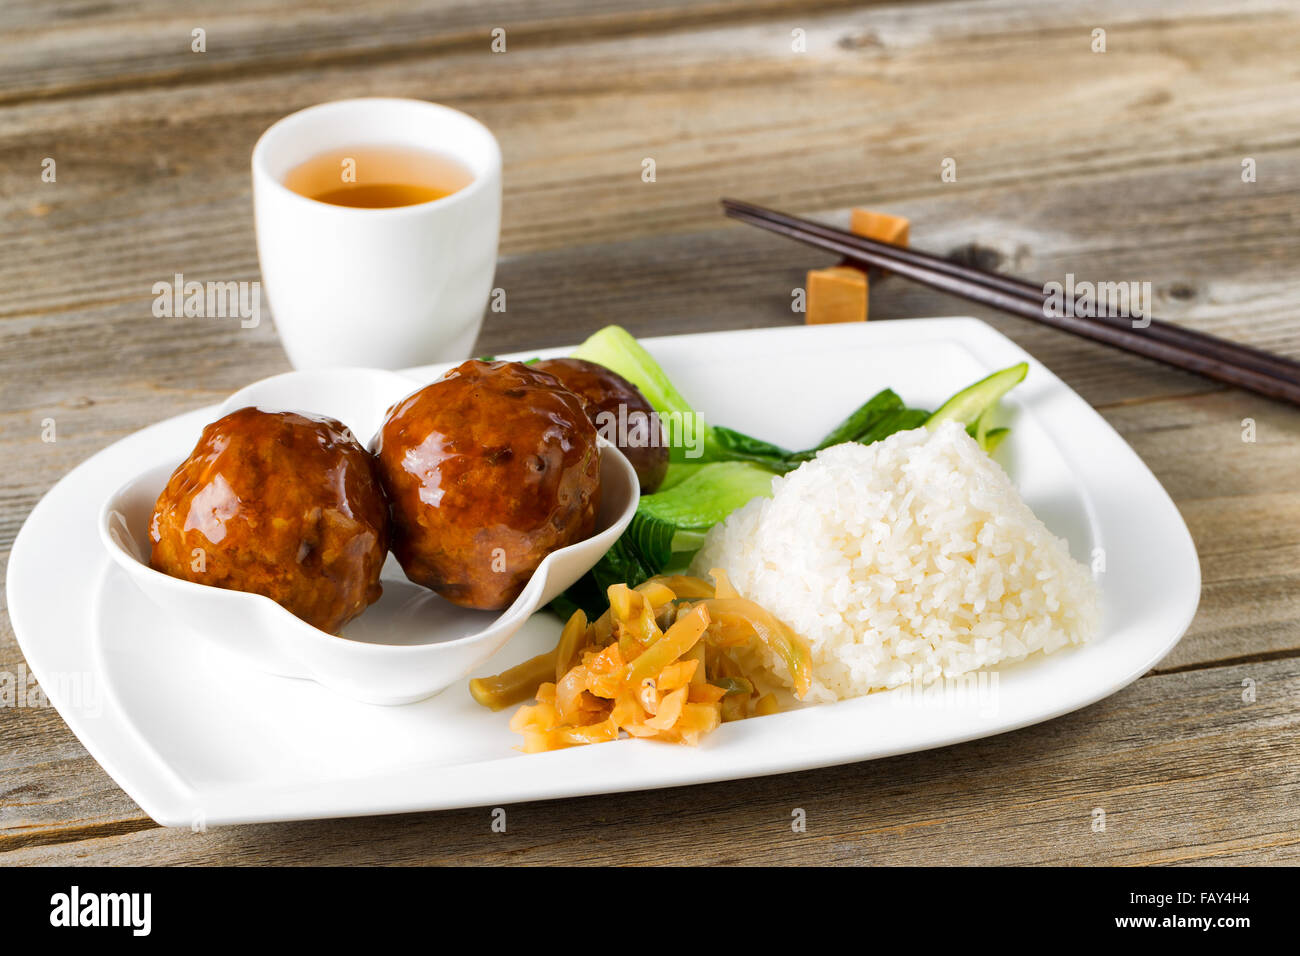 Close up front view Asian saucy meatballs, rice and bok choy on white plate. Chopsticks and green tea in background. Stock Photo